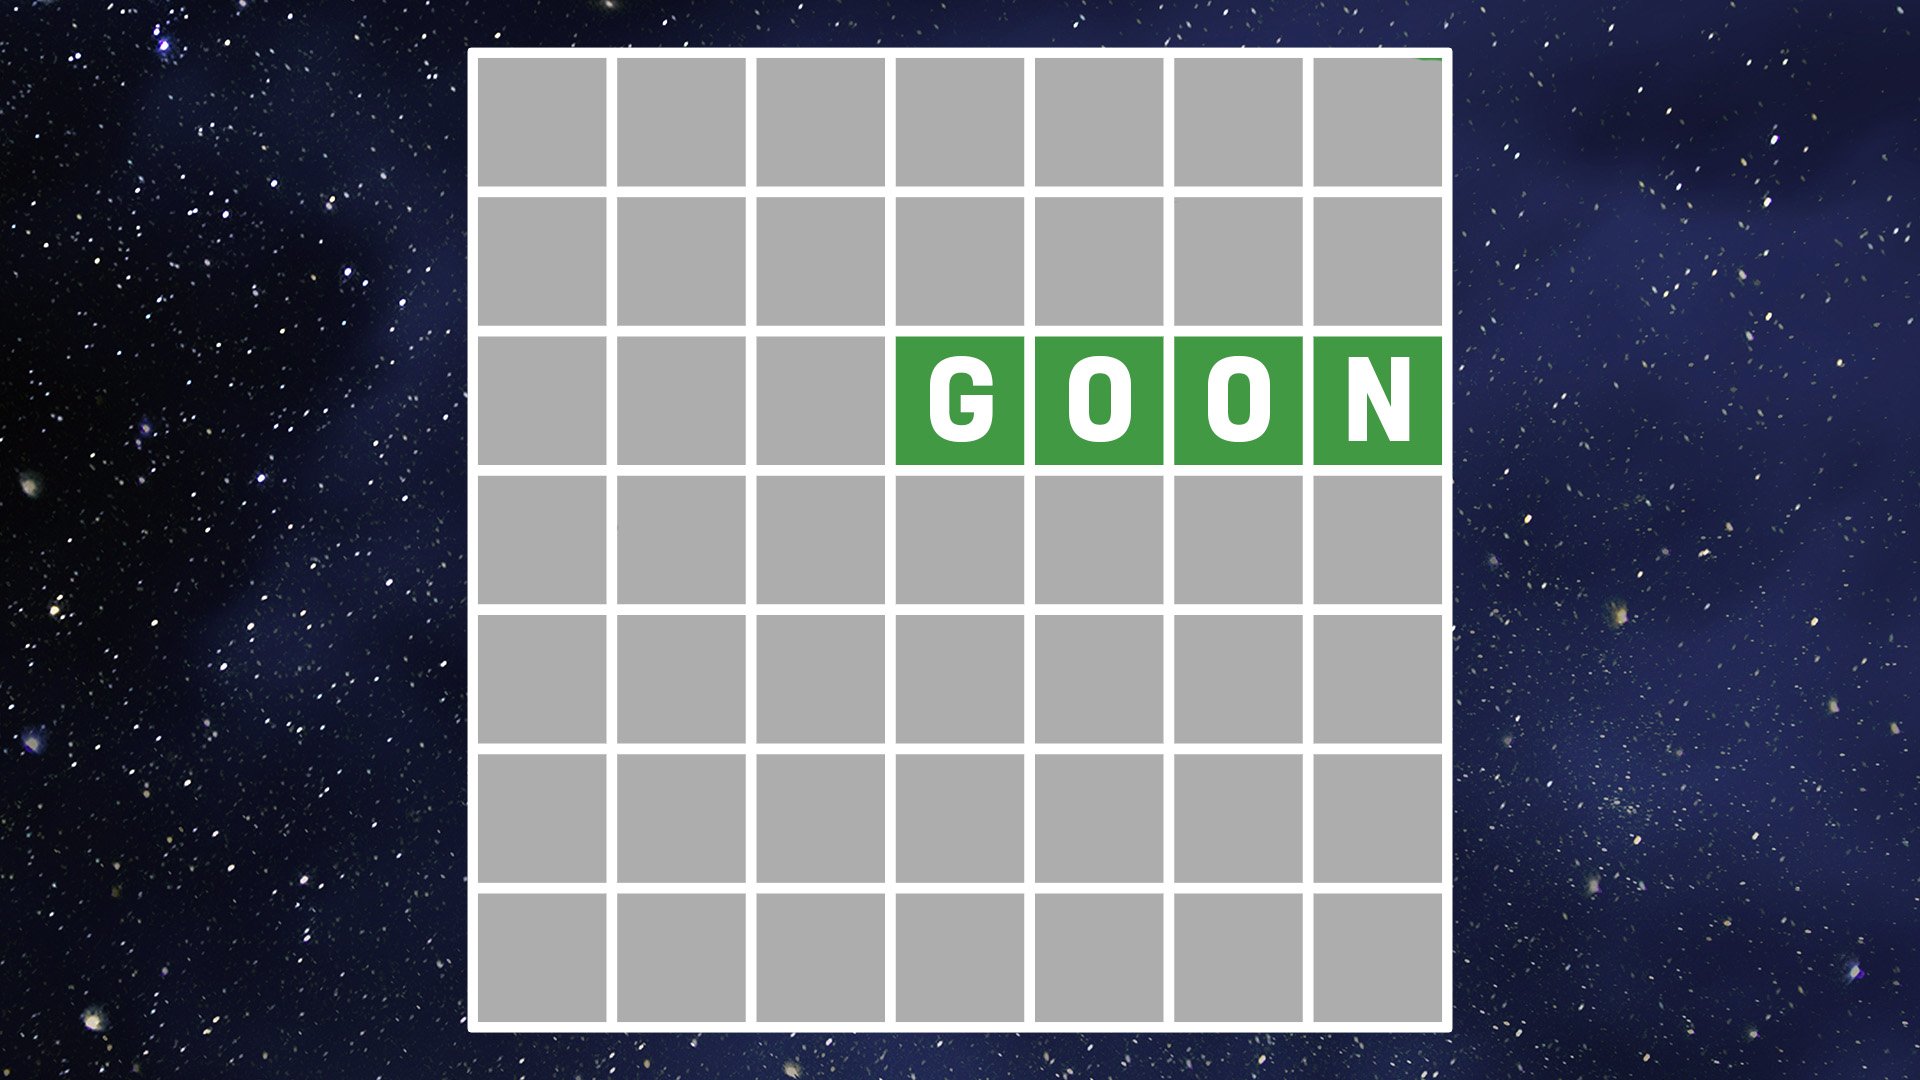 Wordle grid with the word GOON to start you off